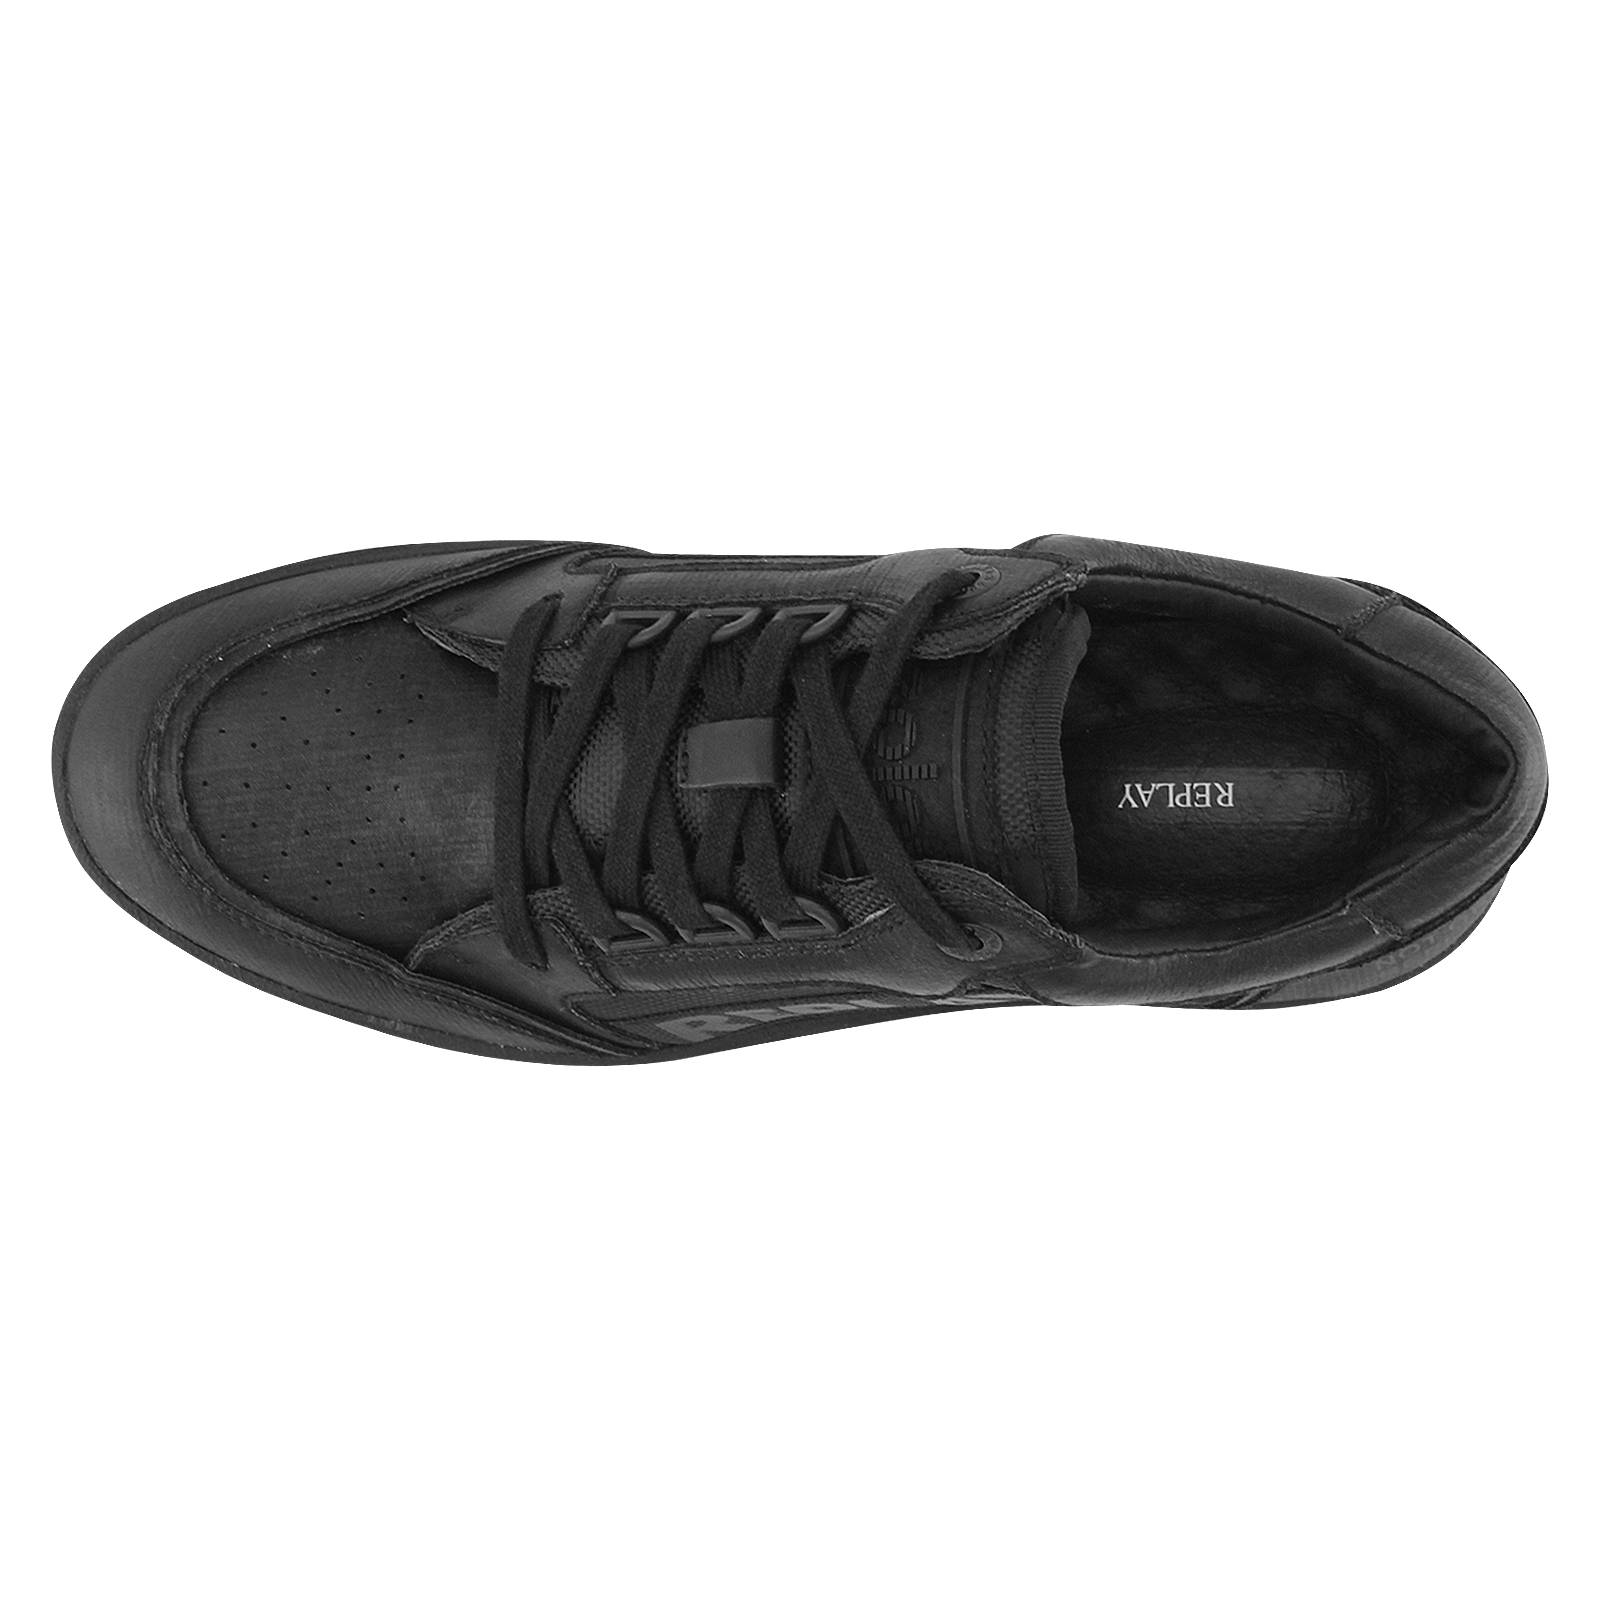 Whitset - Replay Men's casual shoes made of synthetic leather and ...